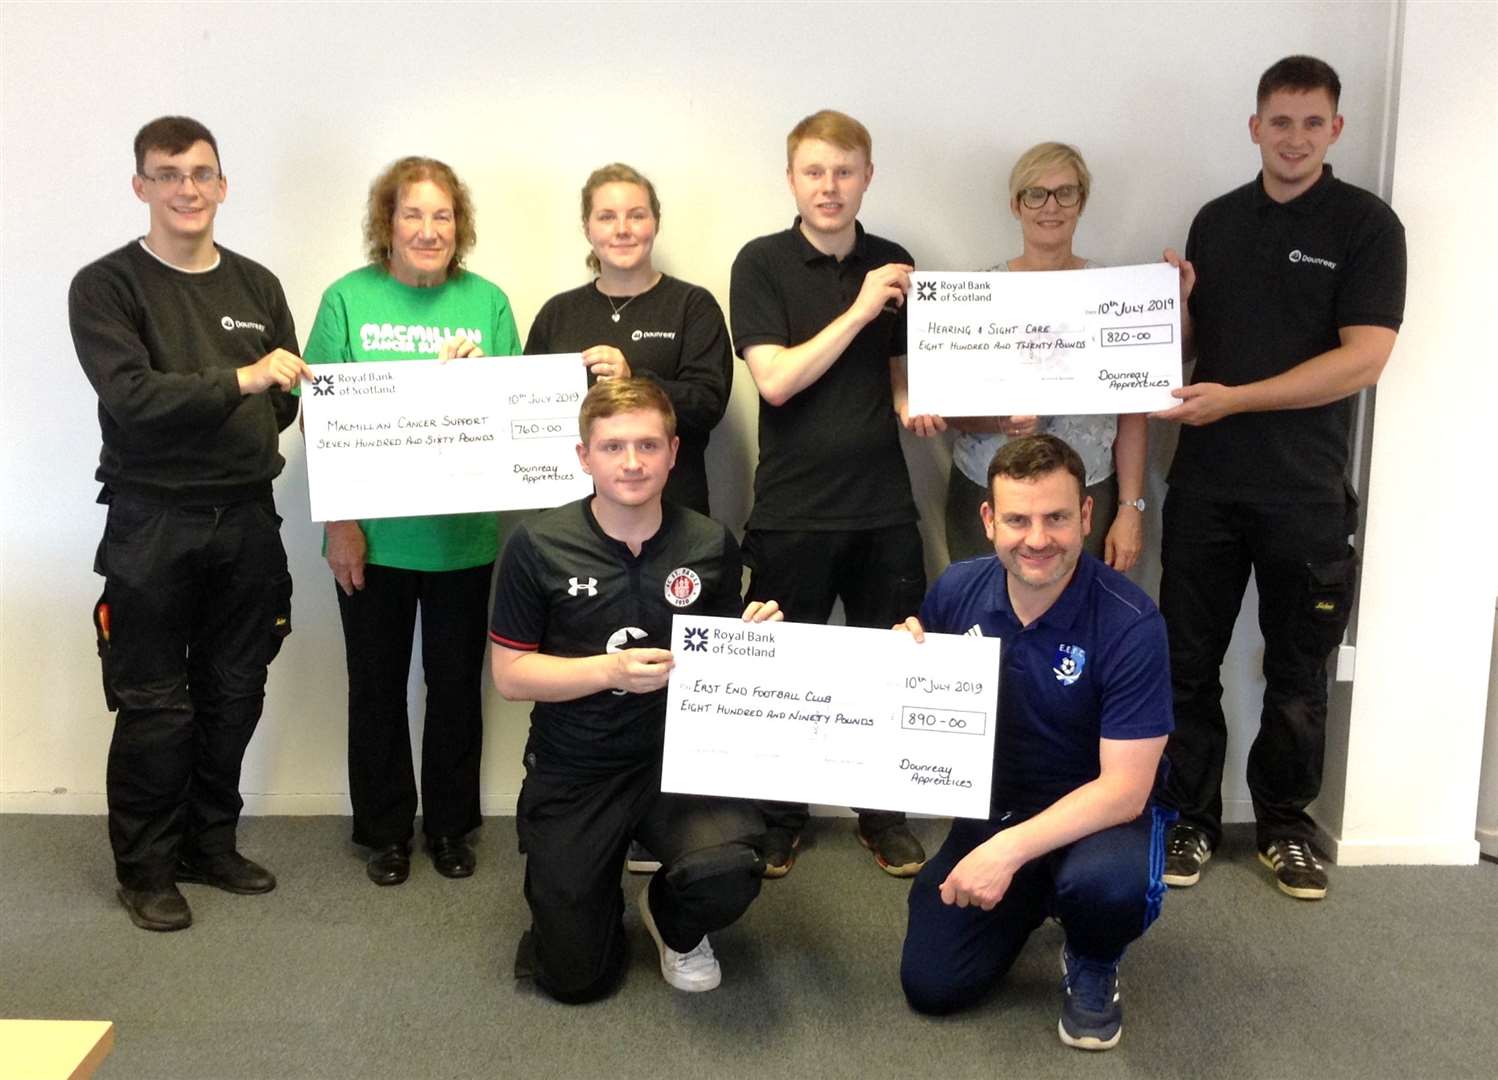 Back, from left: Adam Gunn, Frances Purves (Macmillan Cancer Support), Laura Manson, Michael Mowat, Deirdre Aitken (Hearing and Sight Care) and Sean Lewis. Front: Cameron McIntosh and Derek Shearer (East End FC).